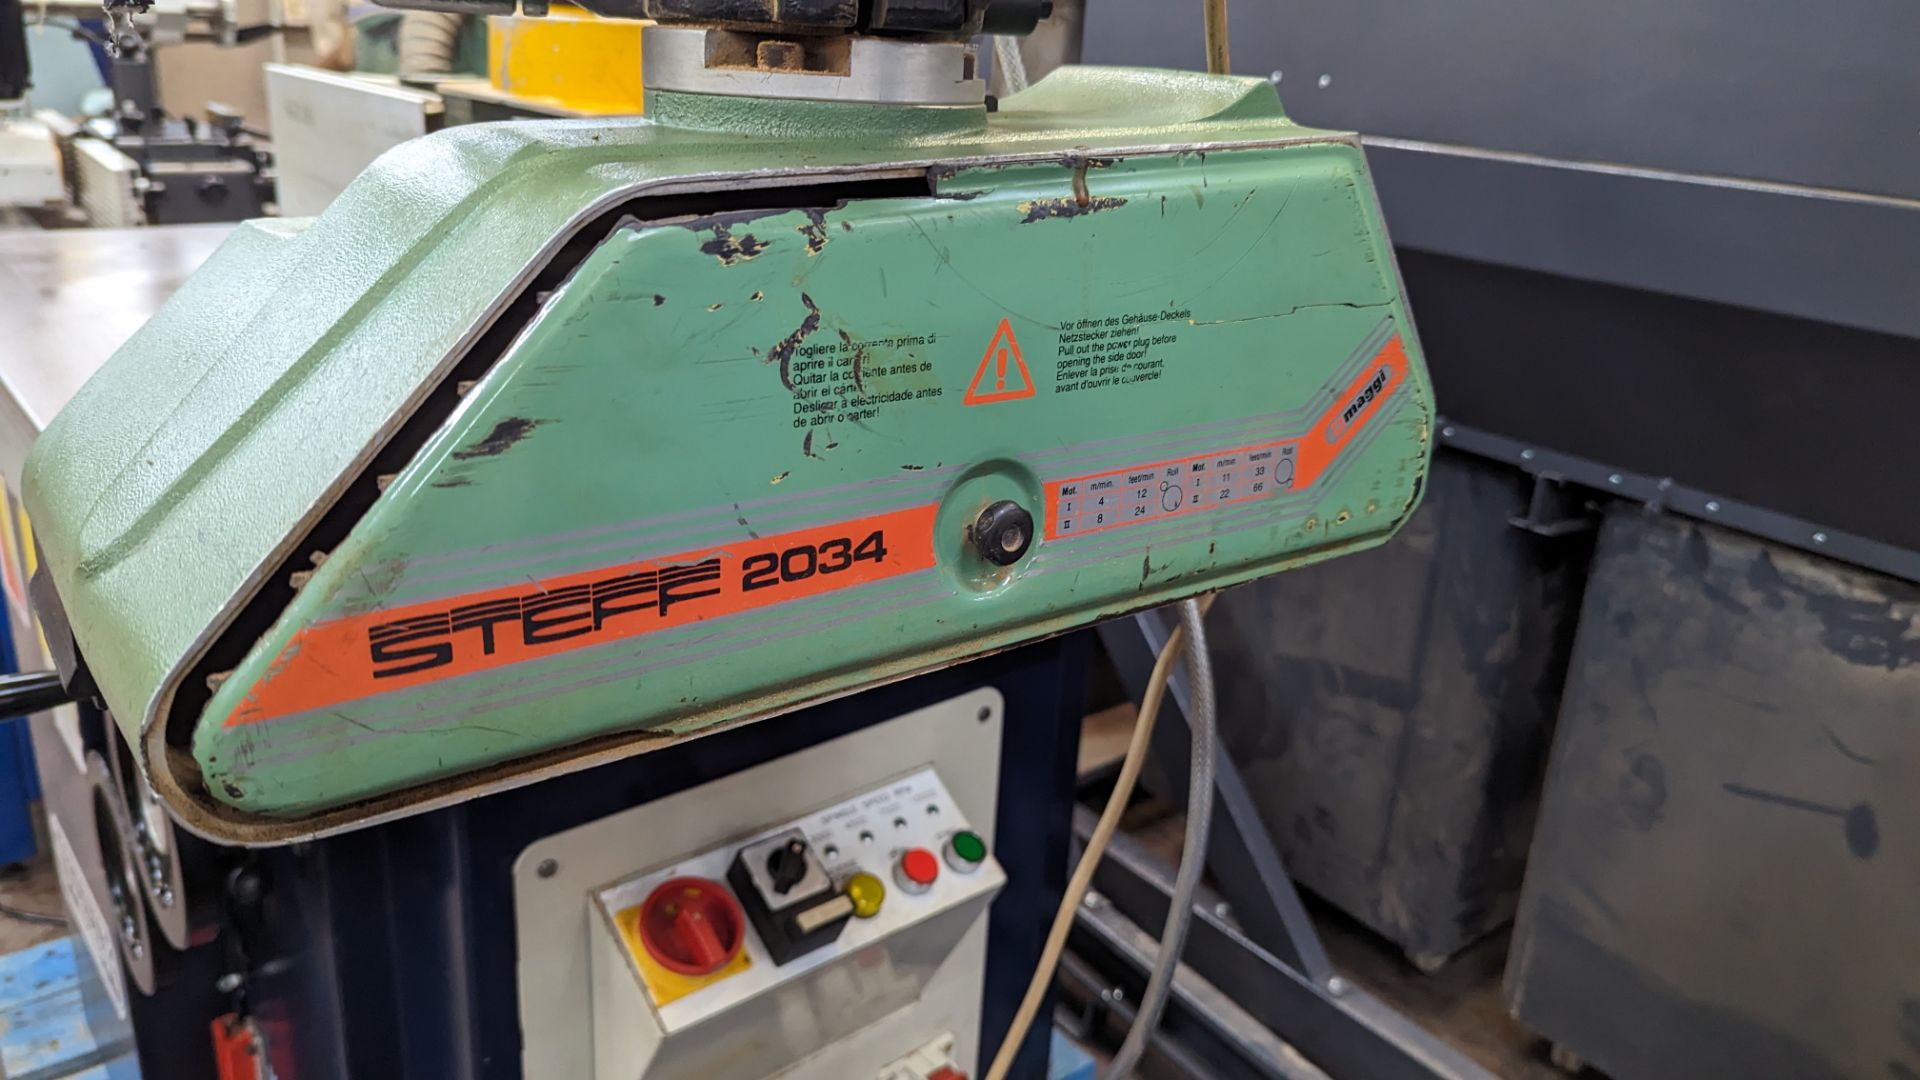 Sedgwick model SM255-T spindle moulder including Steff 2034 power feed - Image 9 of 19